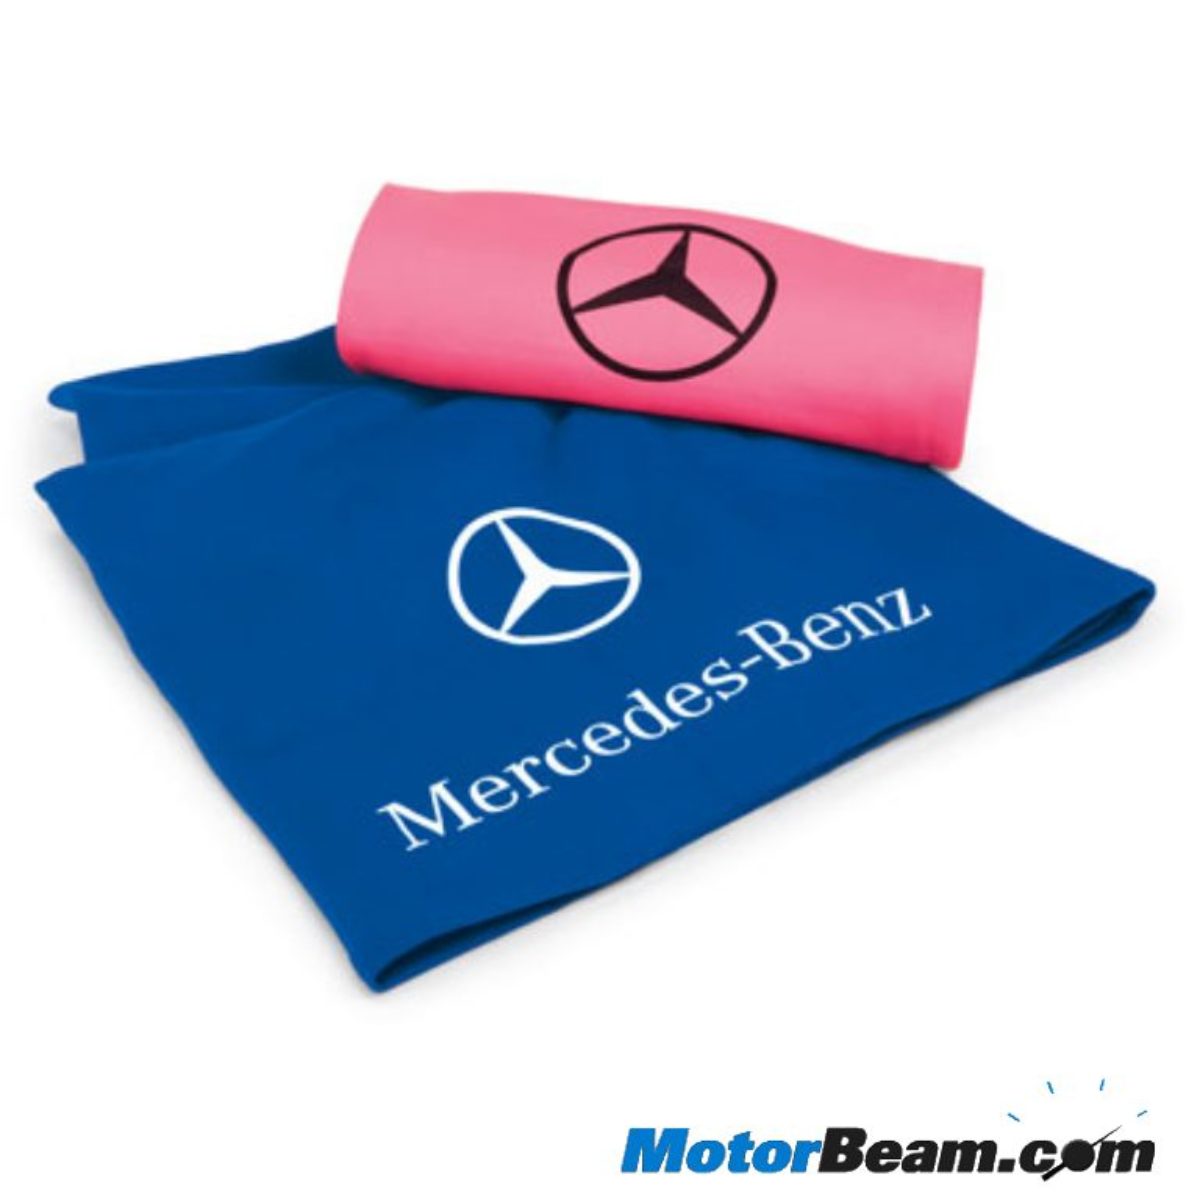 Is There Mercedes-Benz Merchandise?